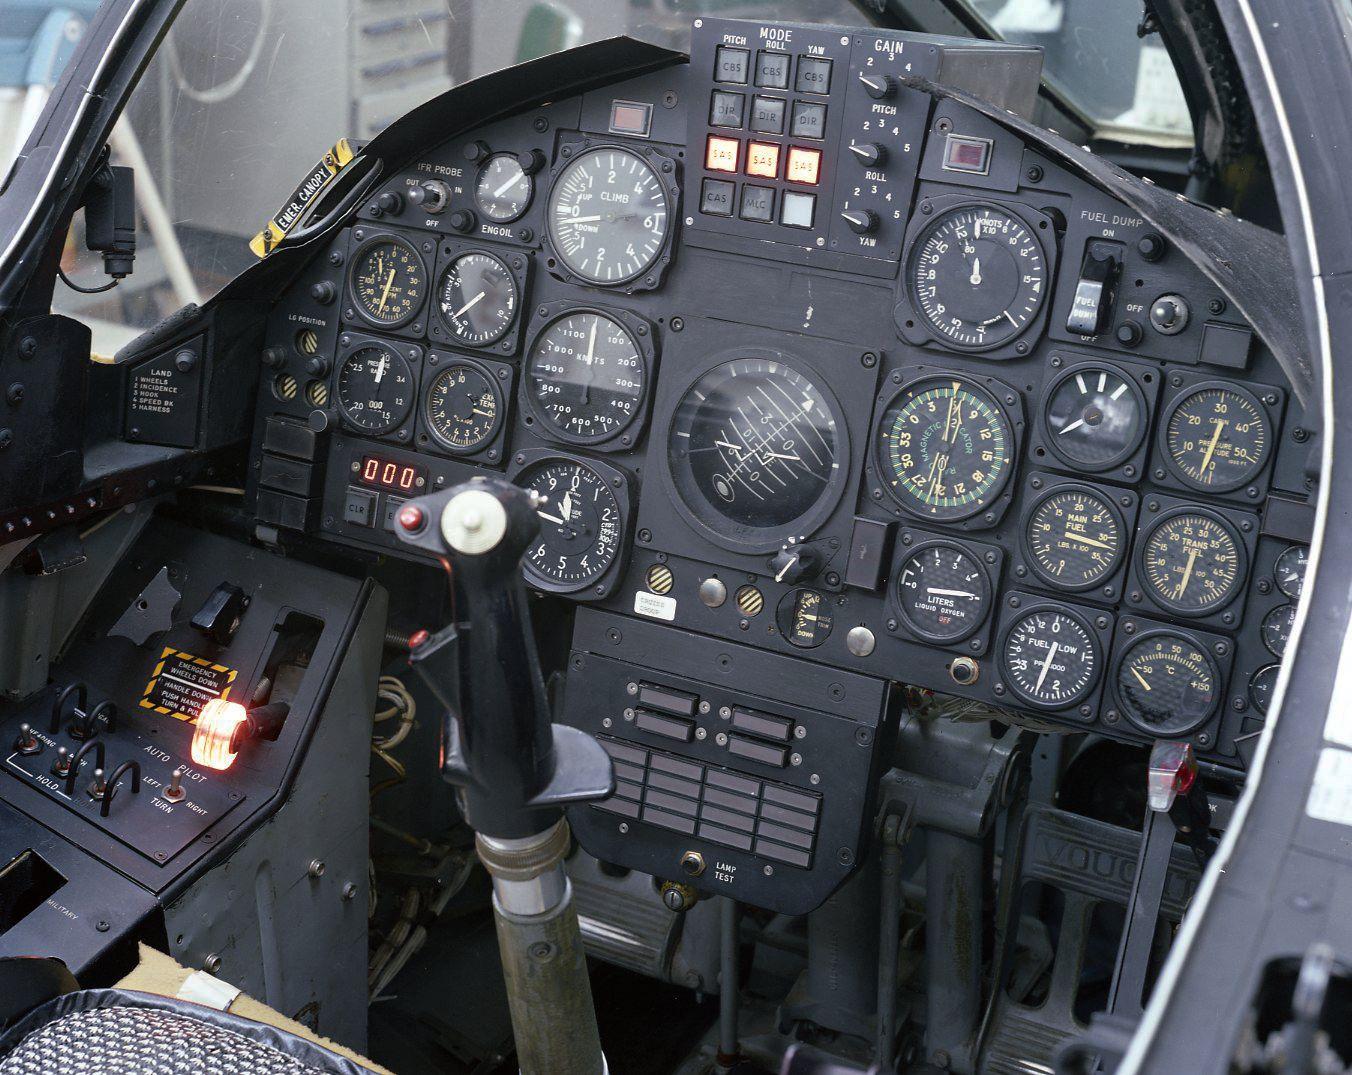 F-8 Digital Fly-By-Wire Cockpit